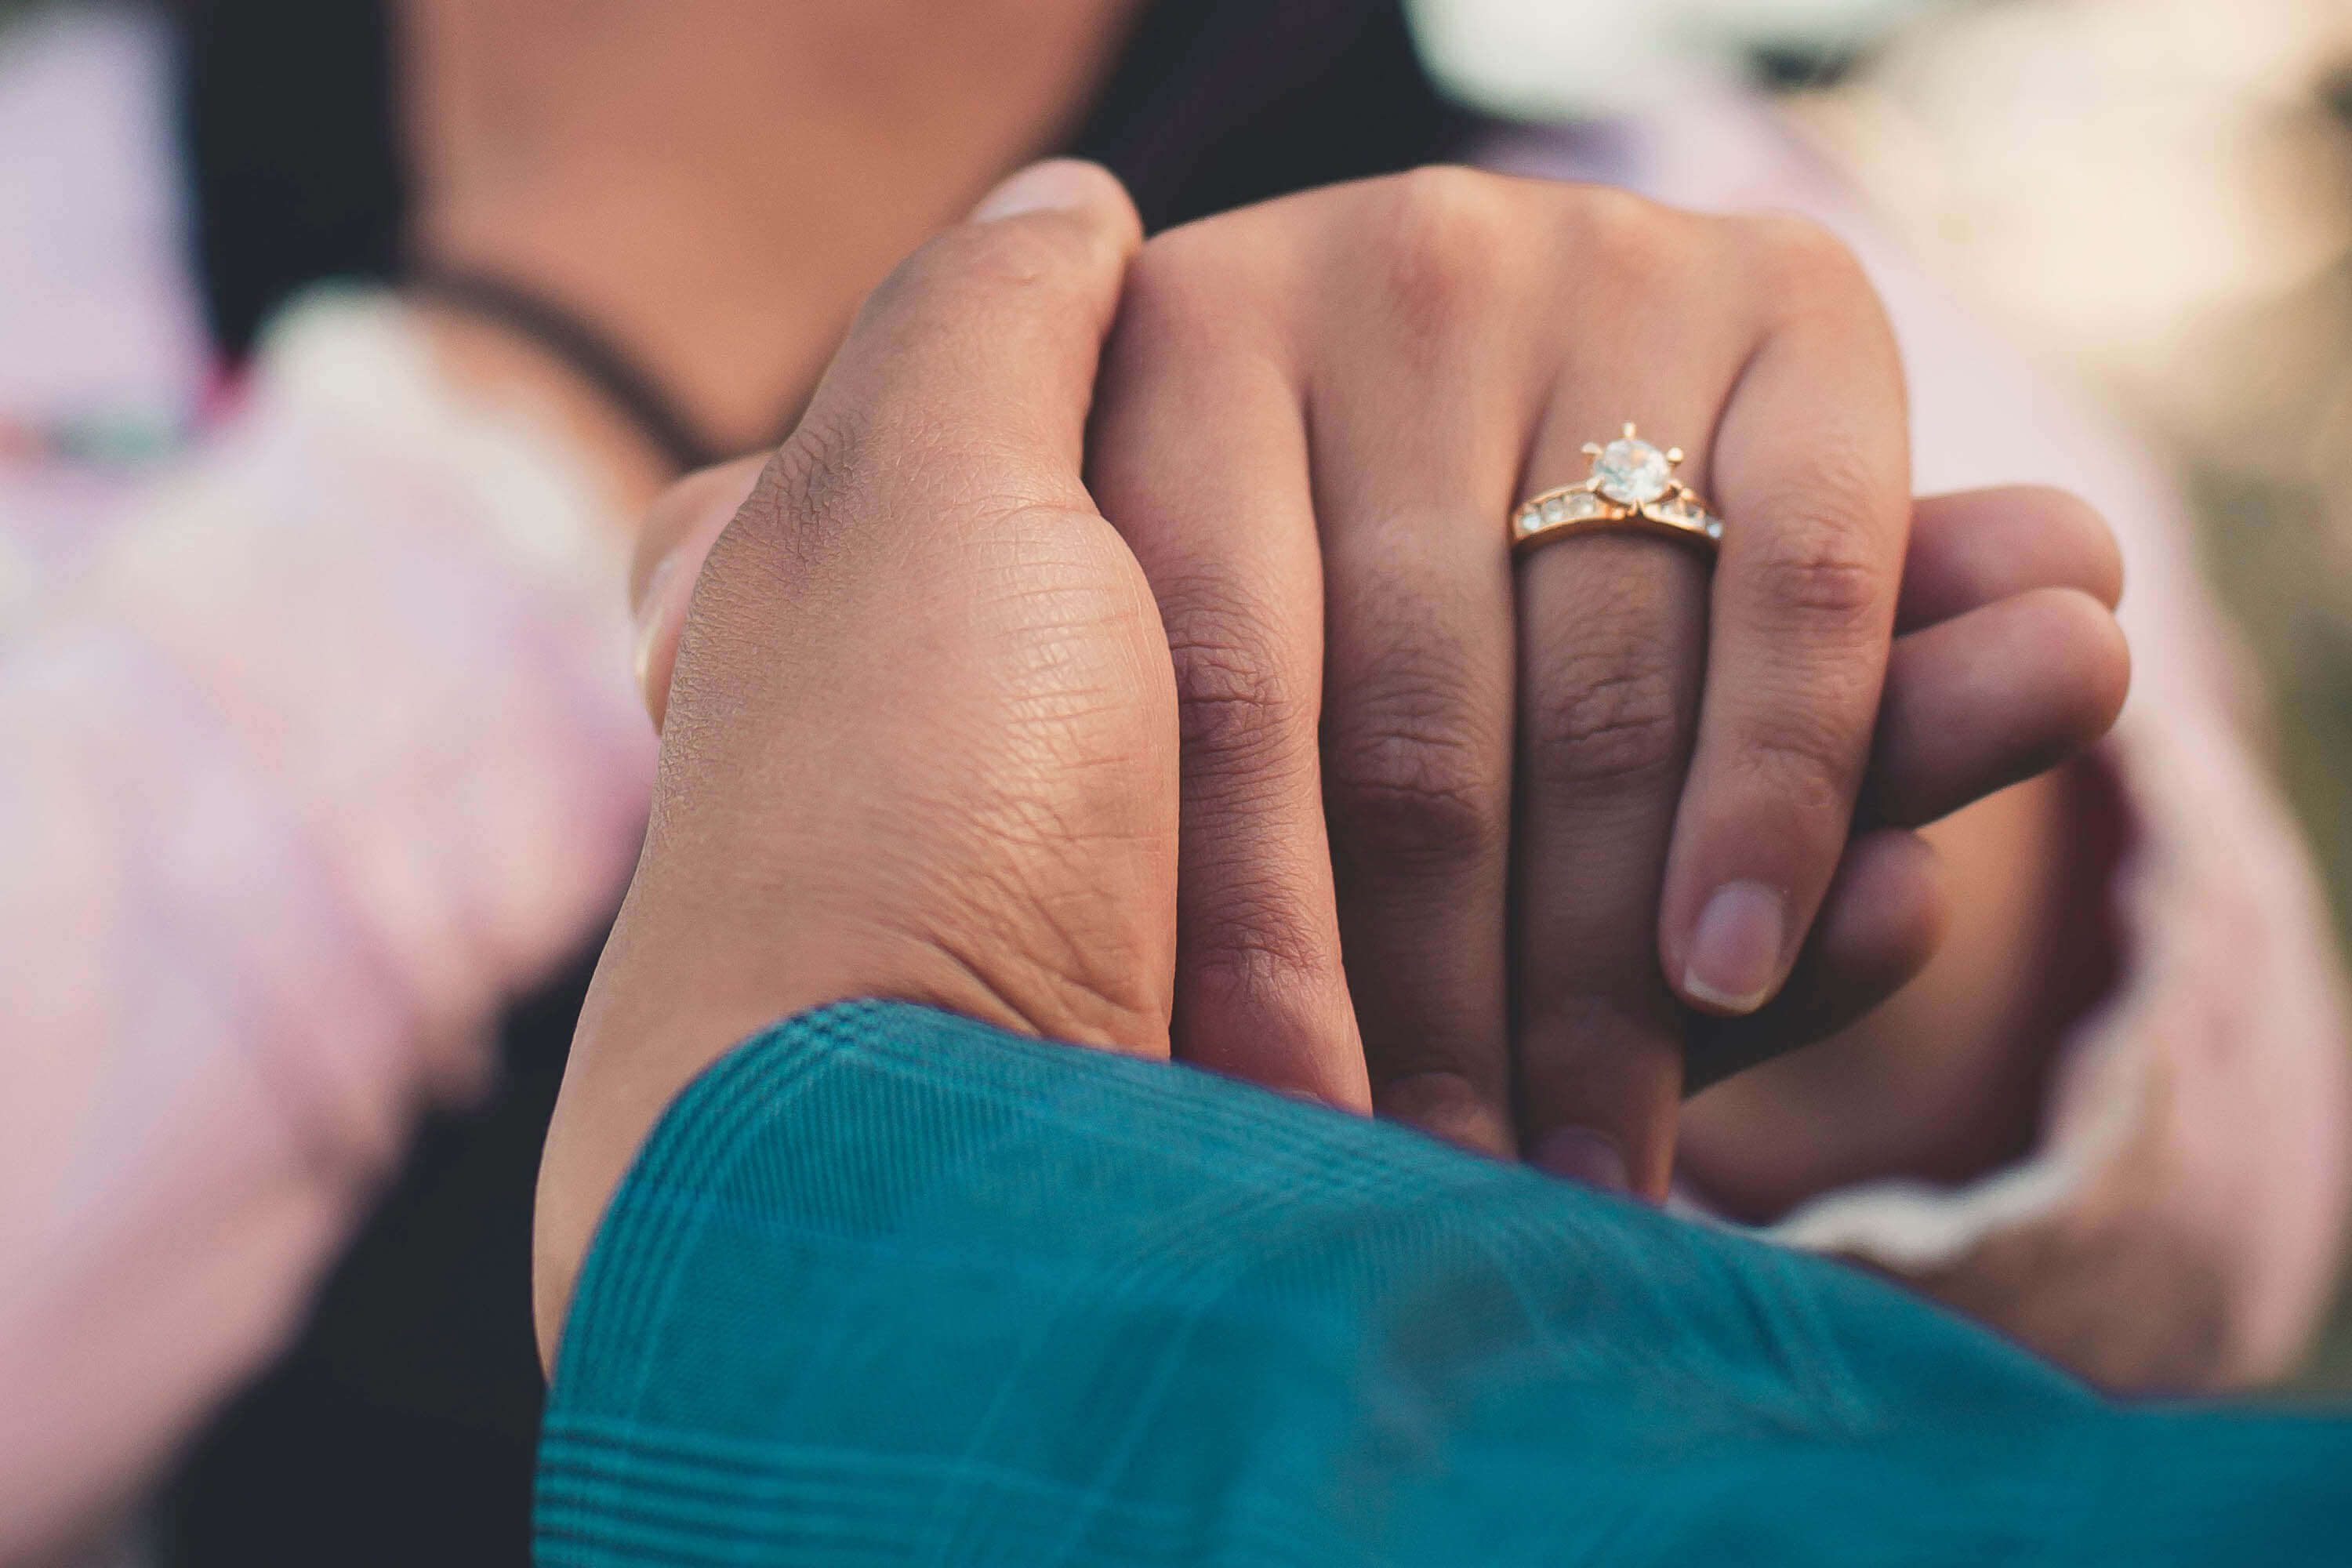 Rules Of Engagement 2021: Opinions On The Perfect Proposal